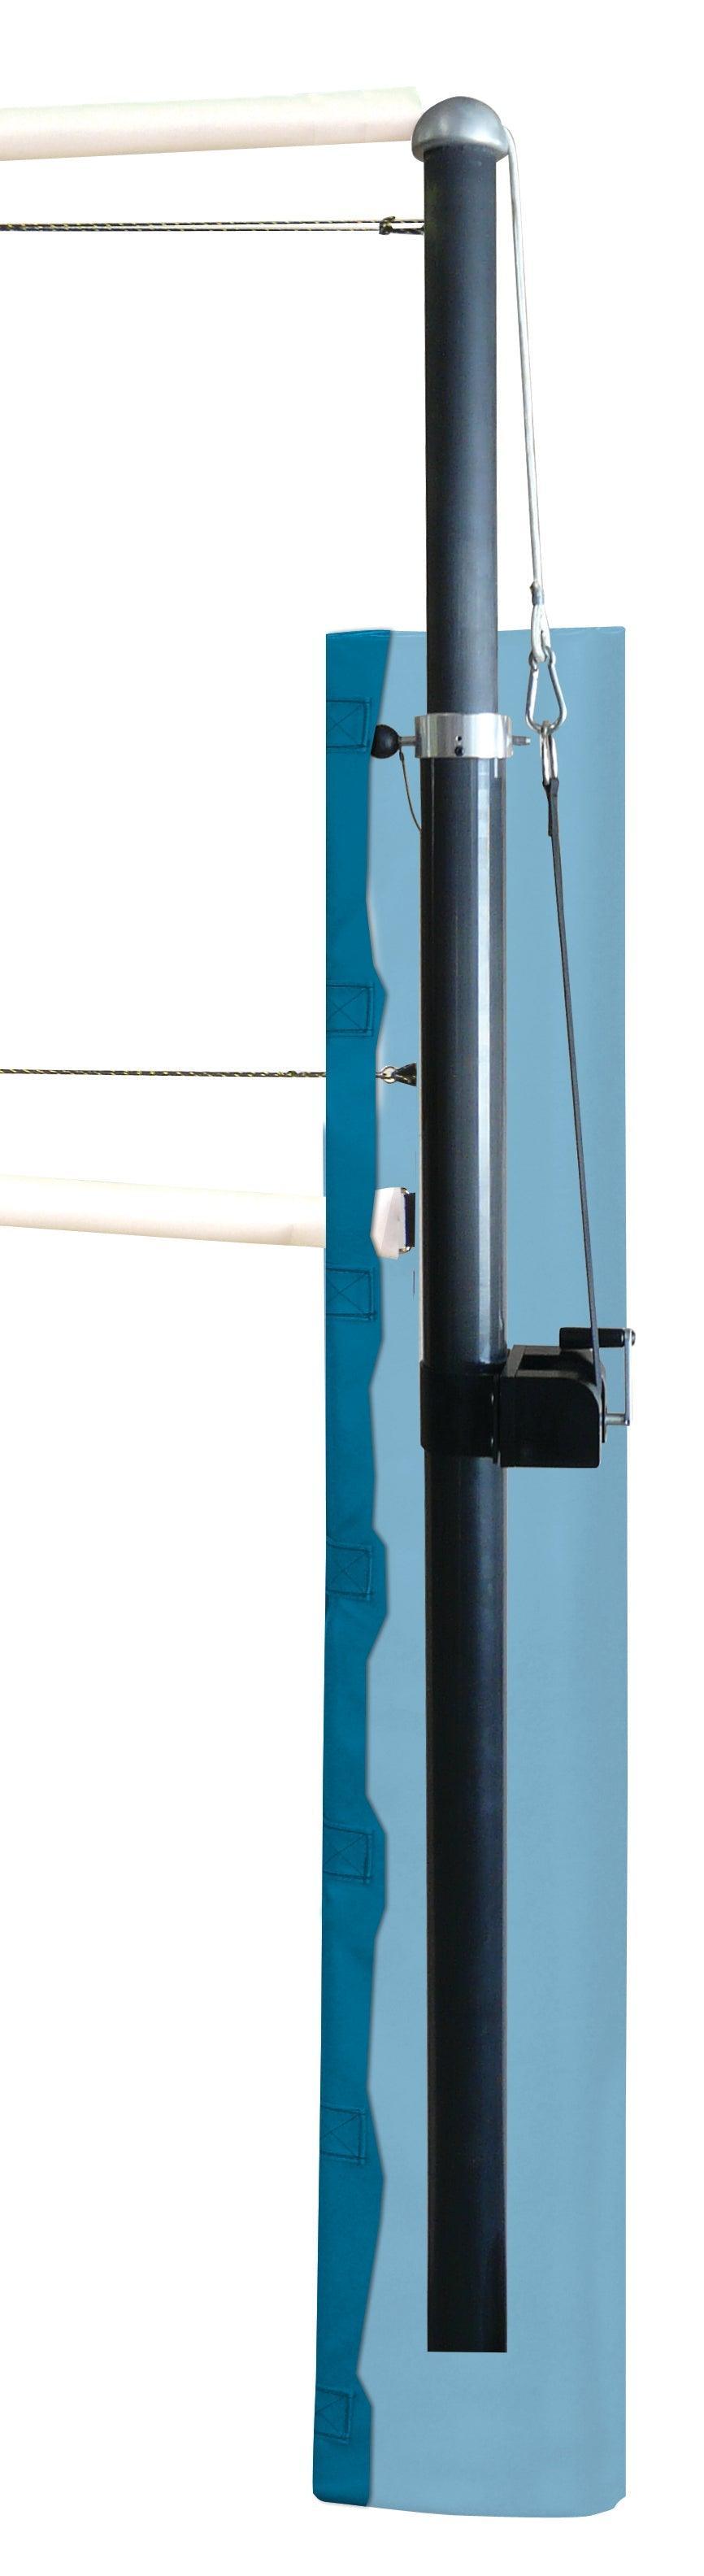 CarbonLite Composite Volleyball Double Court System without Sockets - bisoninc